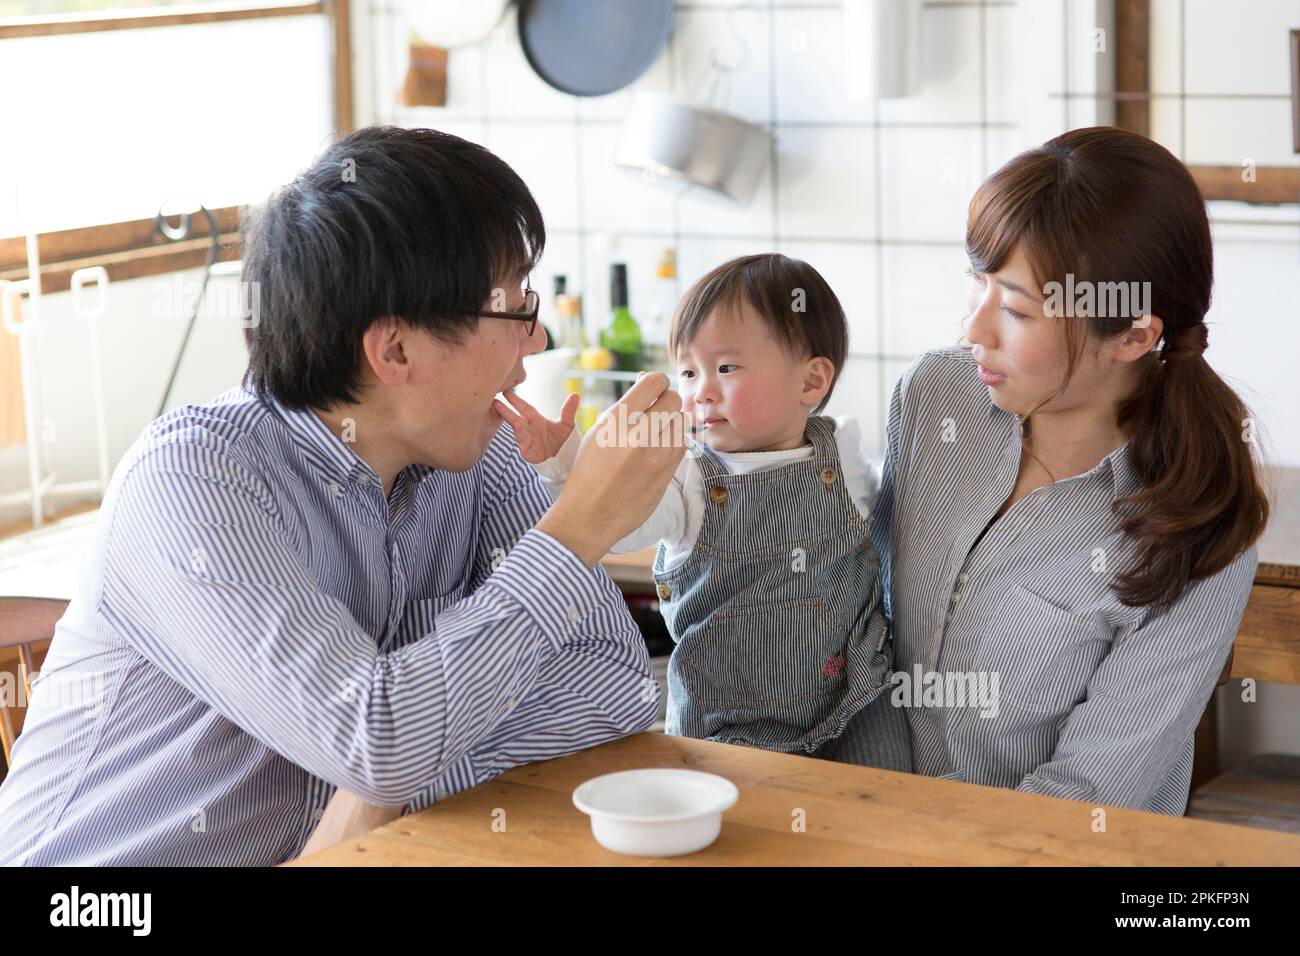 Family relaxing at the kitchen table Stock Photo